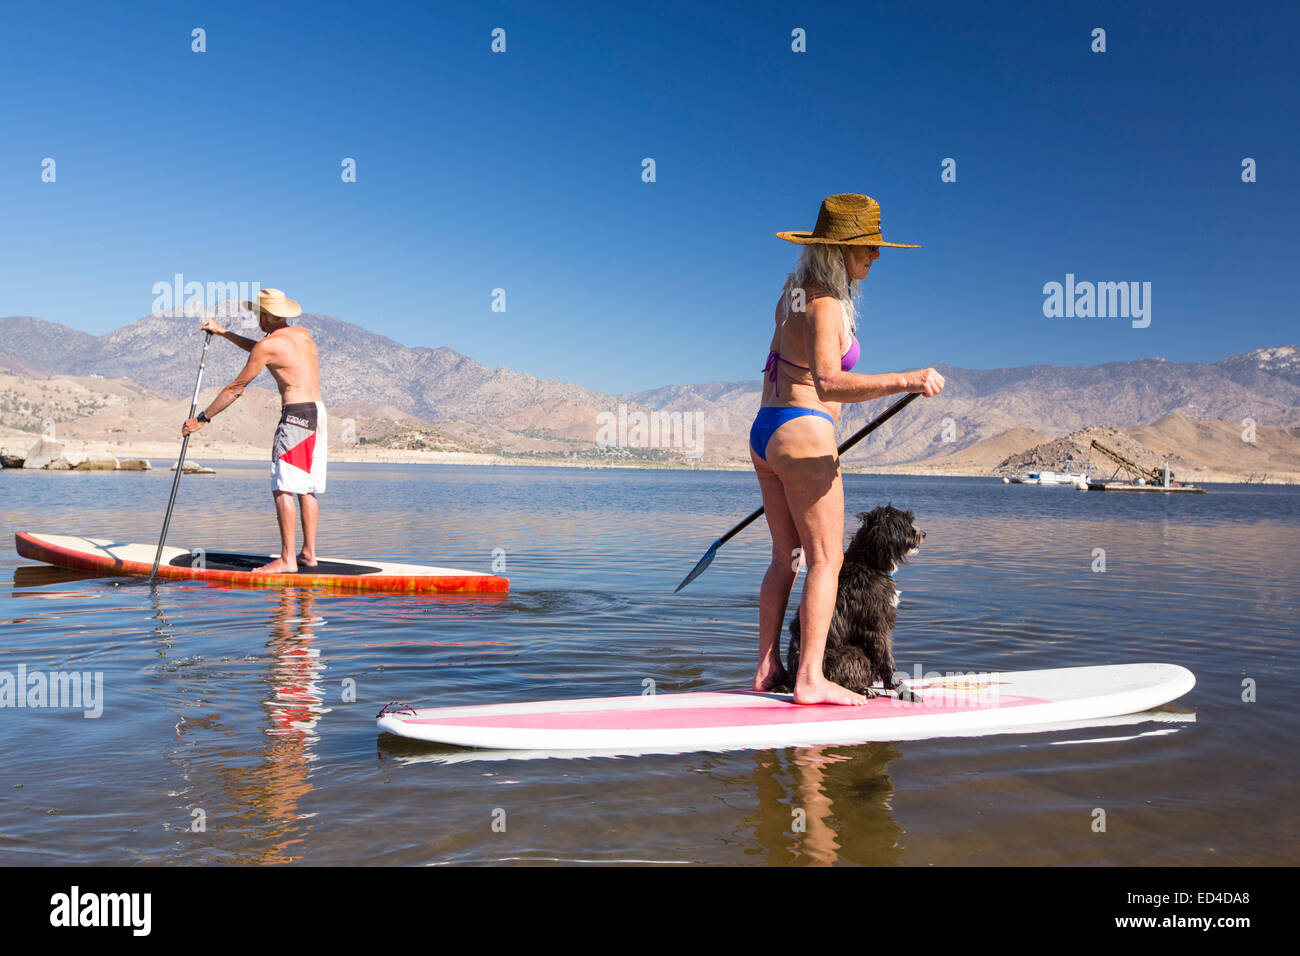 Pensioners paddle boarding on the drought impacted Lake Isabella in California, USA. Stock Photo